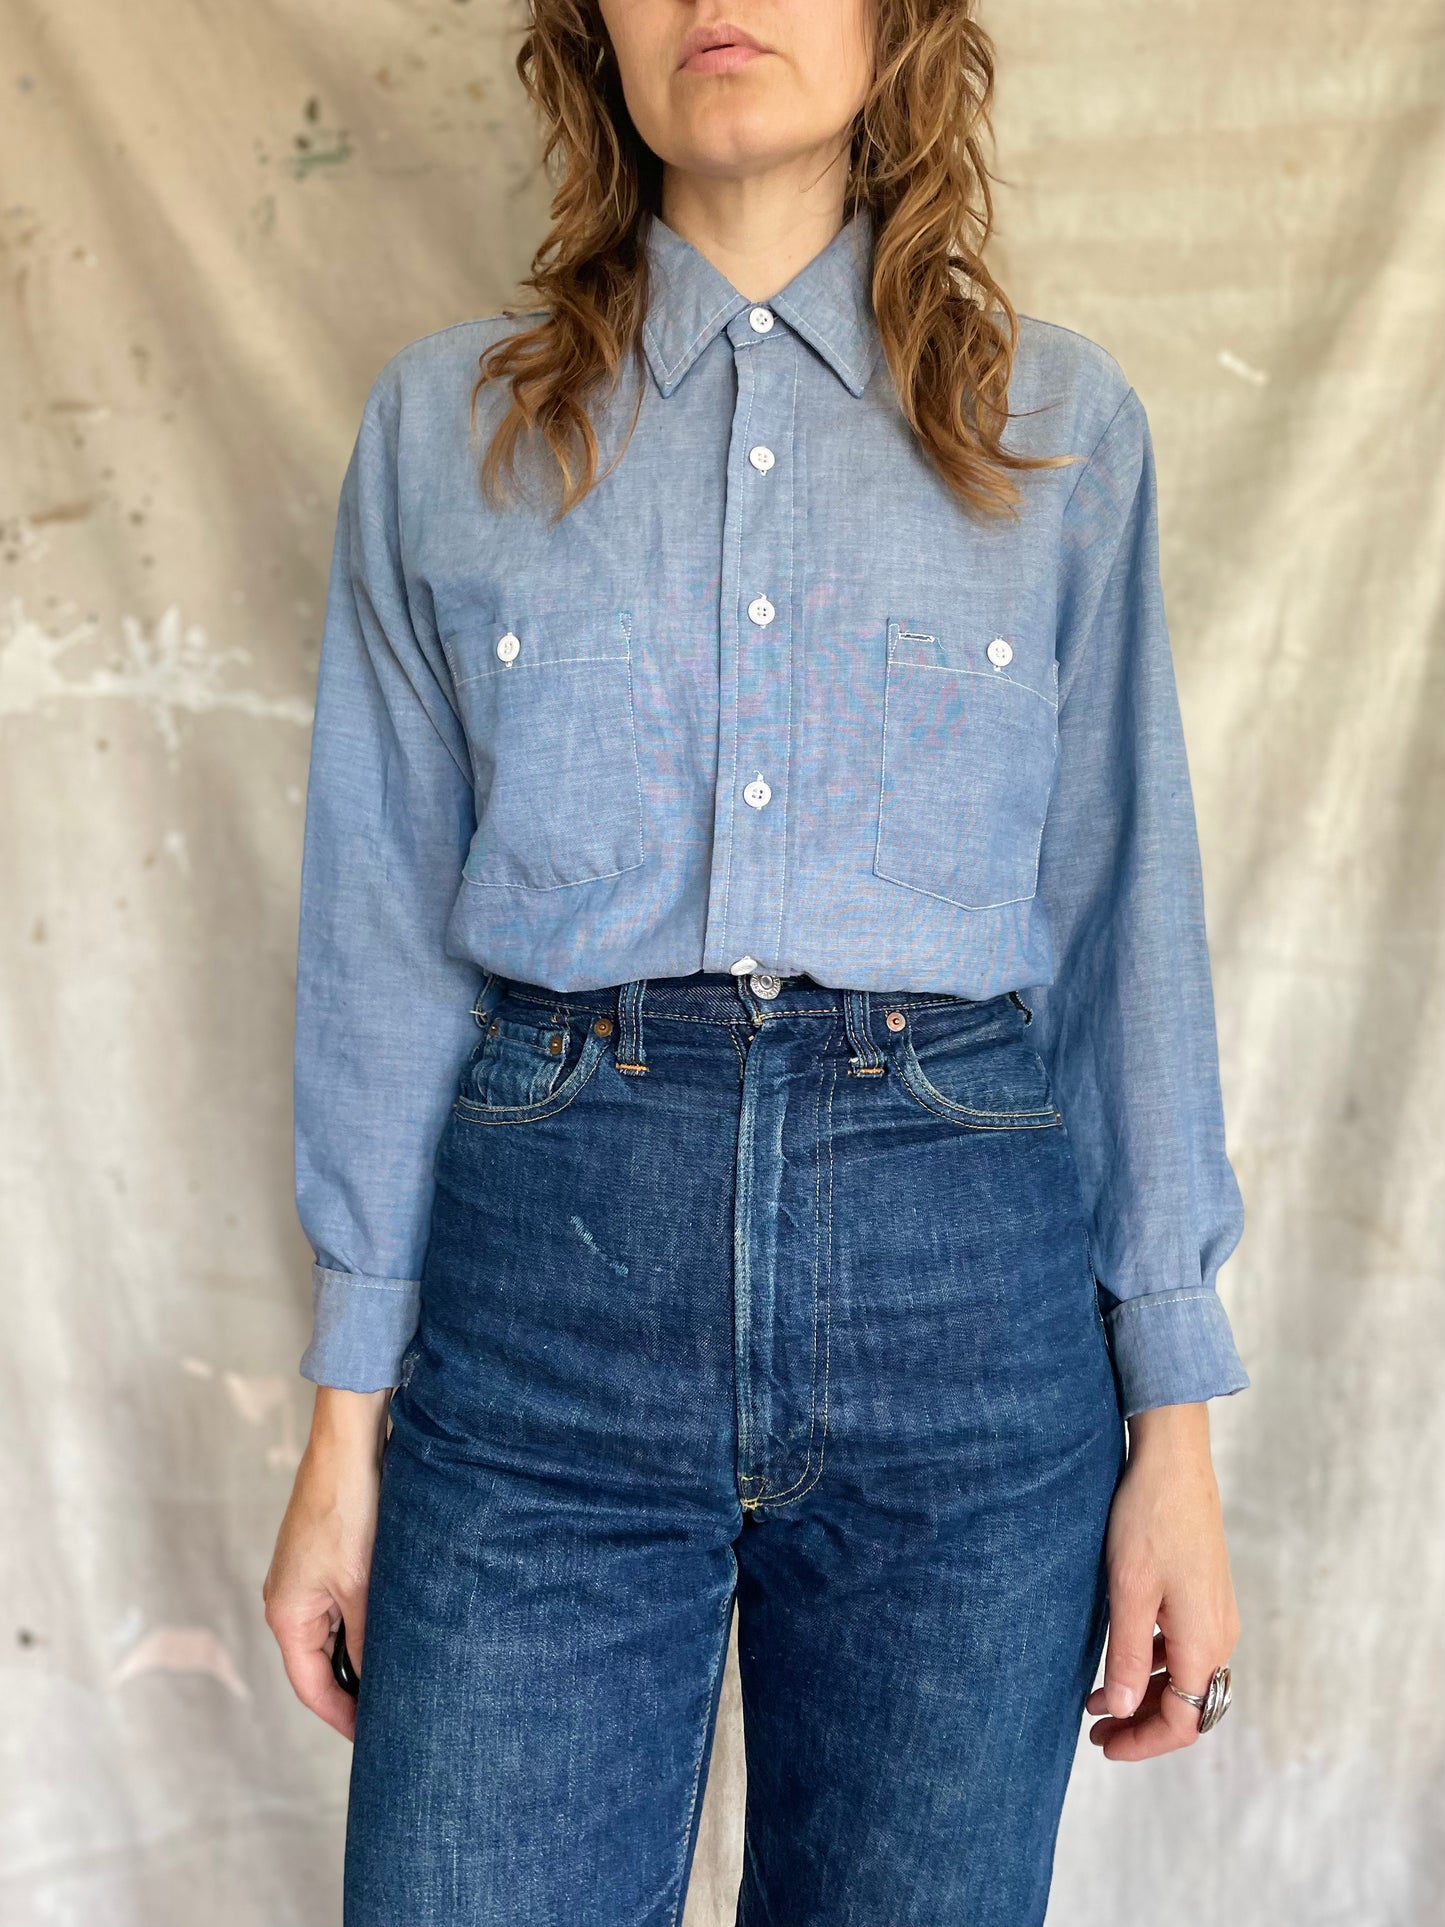 80s Chambray Button Down Work Shirt